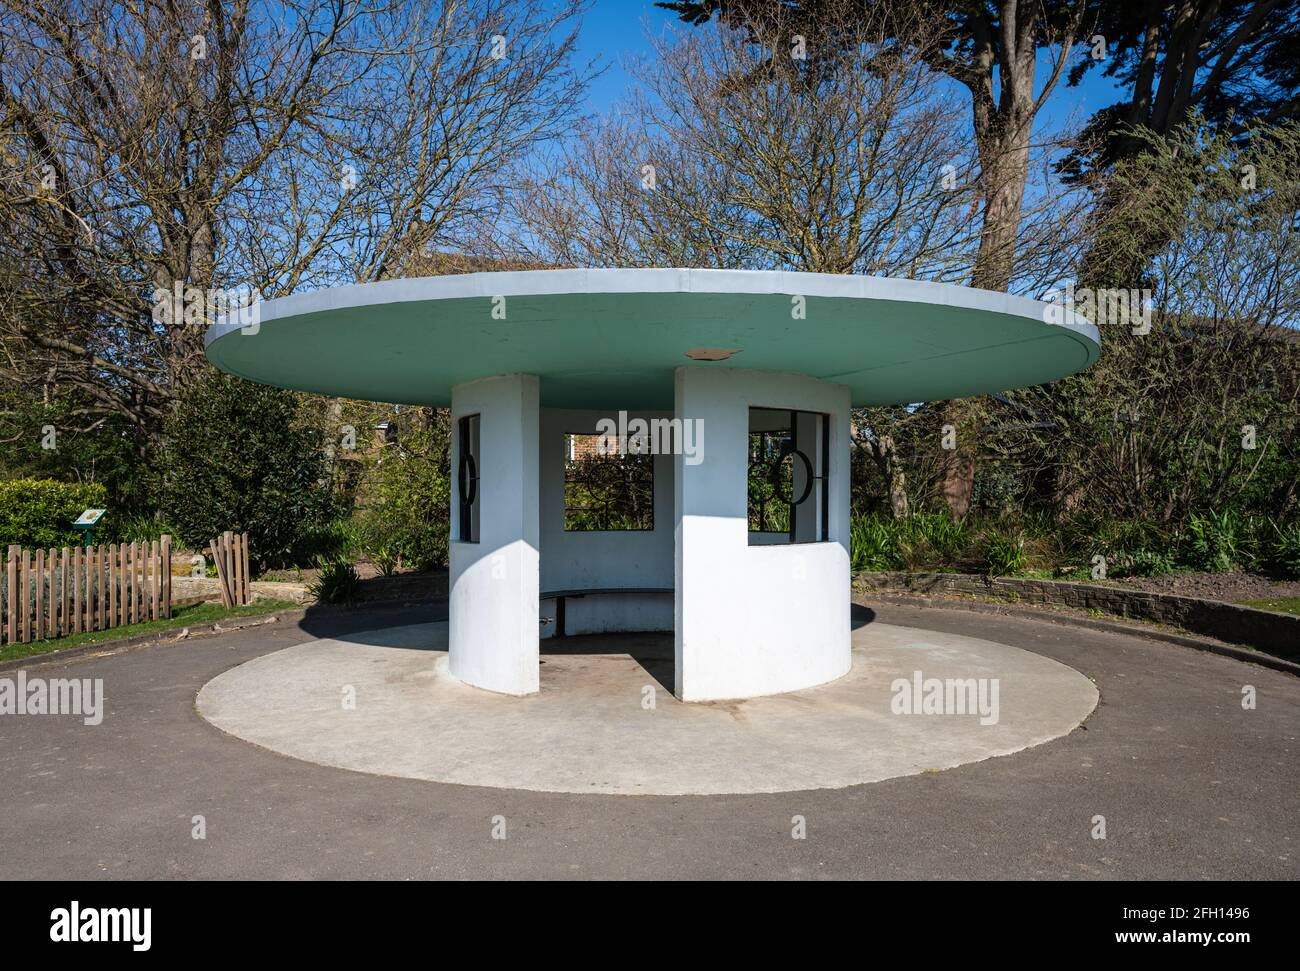 Art Deco style shelter built in the 1930's in Mewsbrook Park, Littlehampton, West Sussex, England, UK. Stock Photo